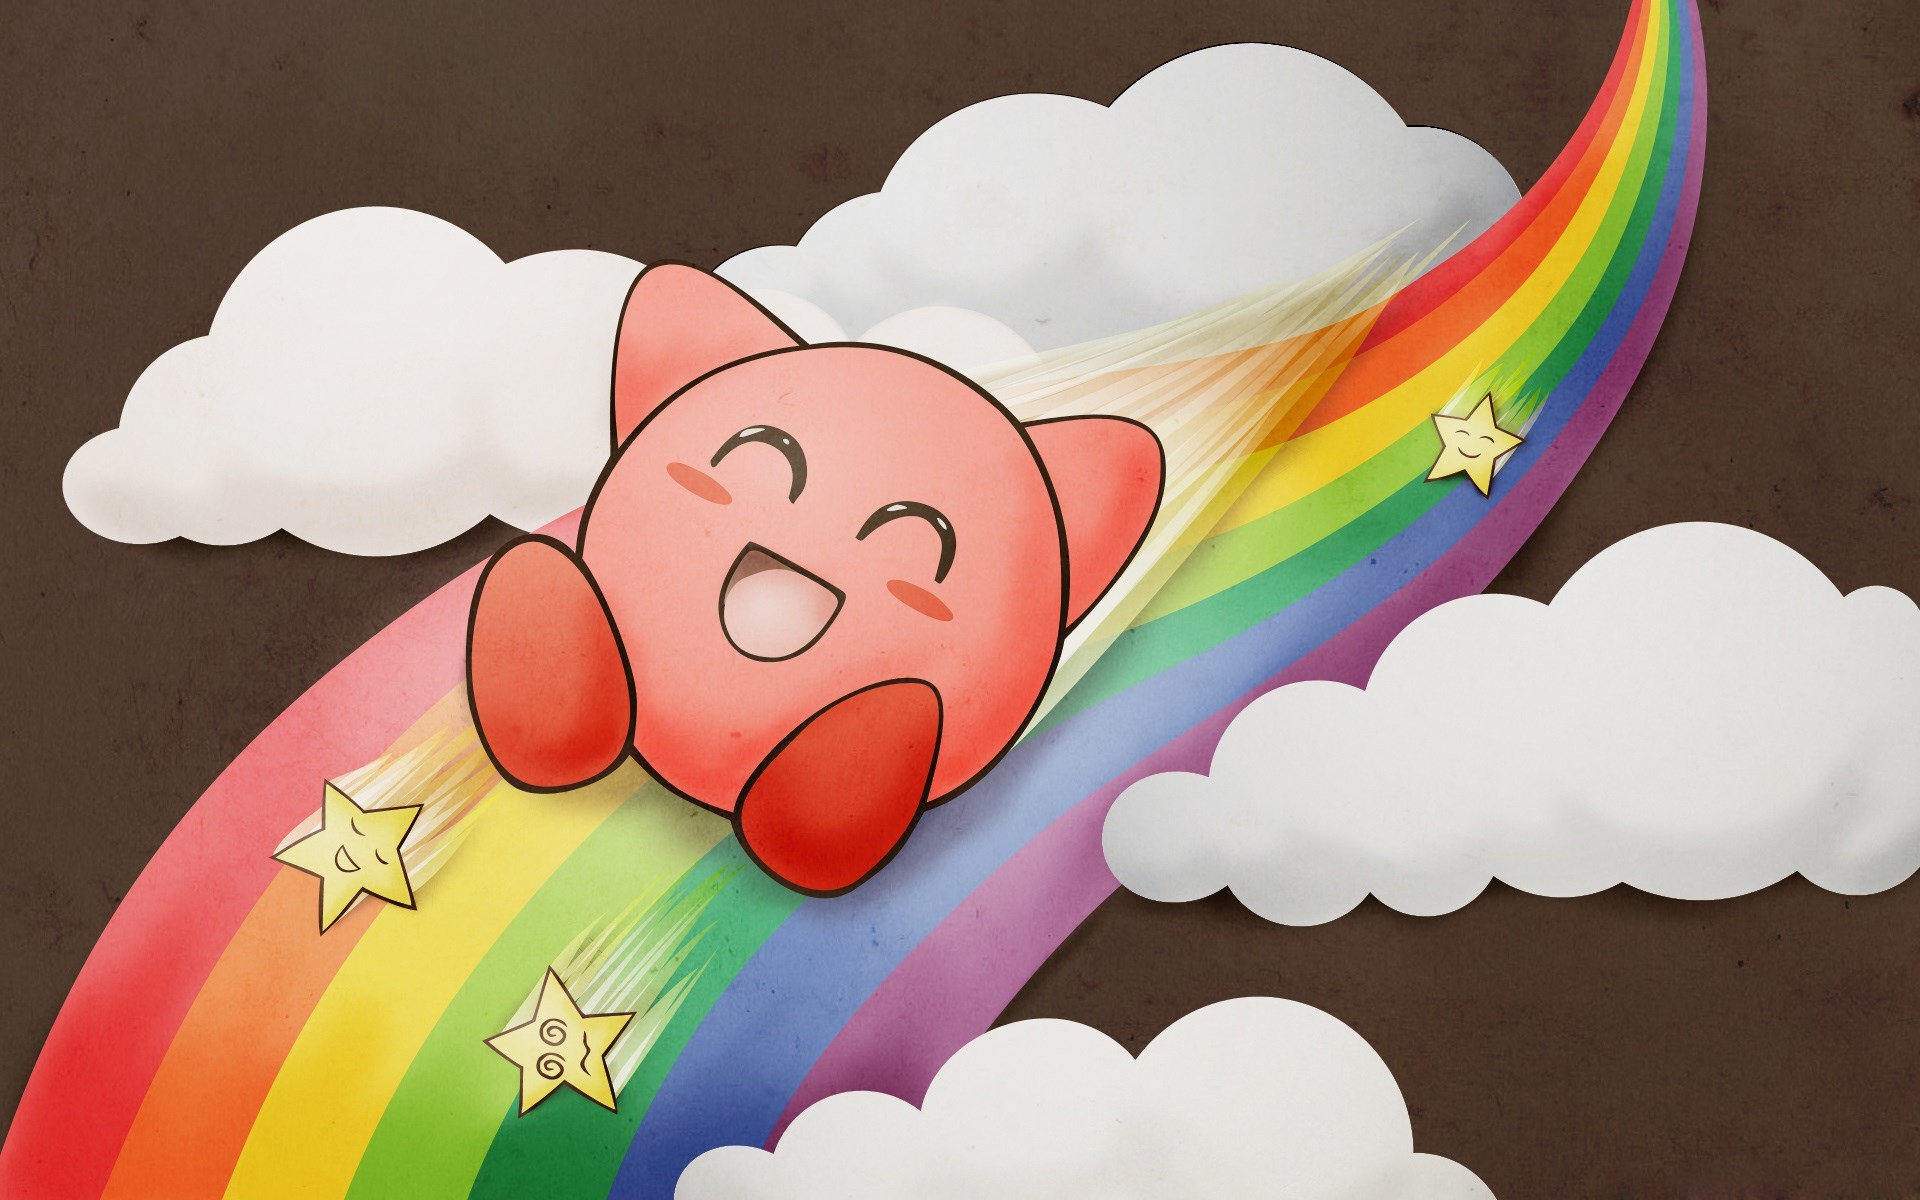 Free Kirby Wallpaper by bluemesito on DeviantArt